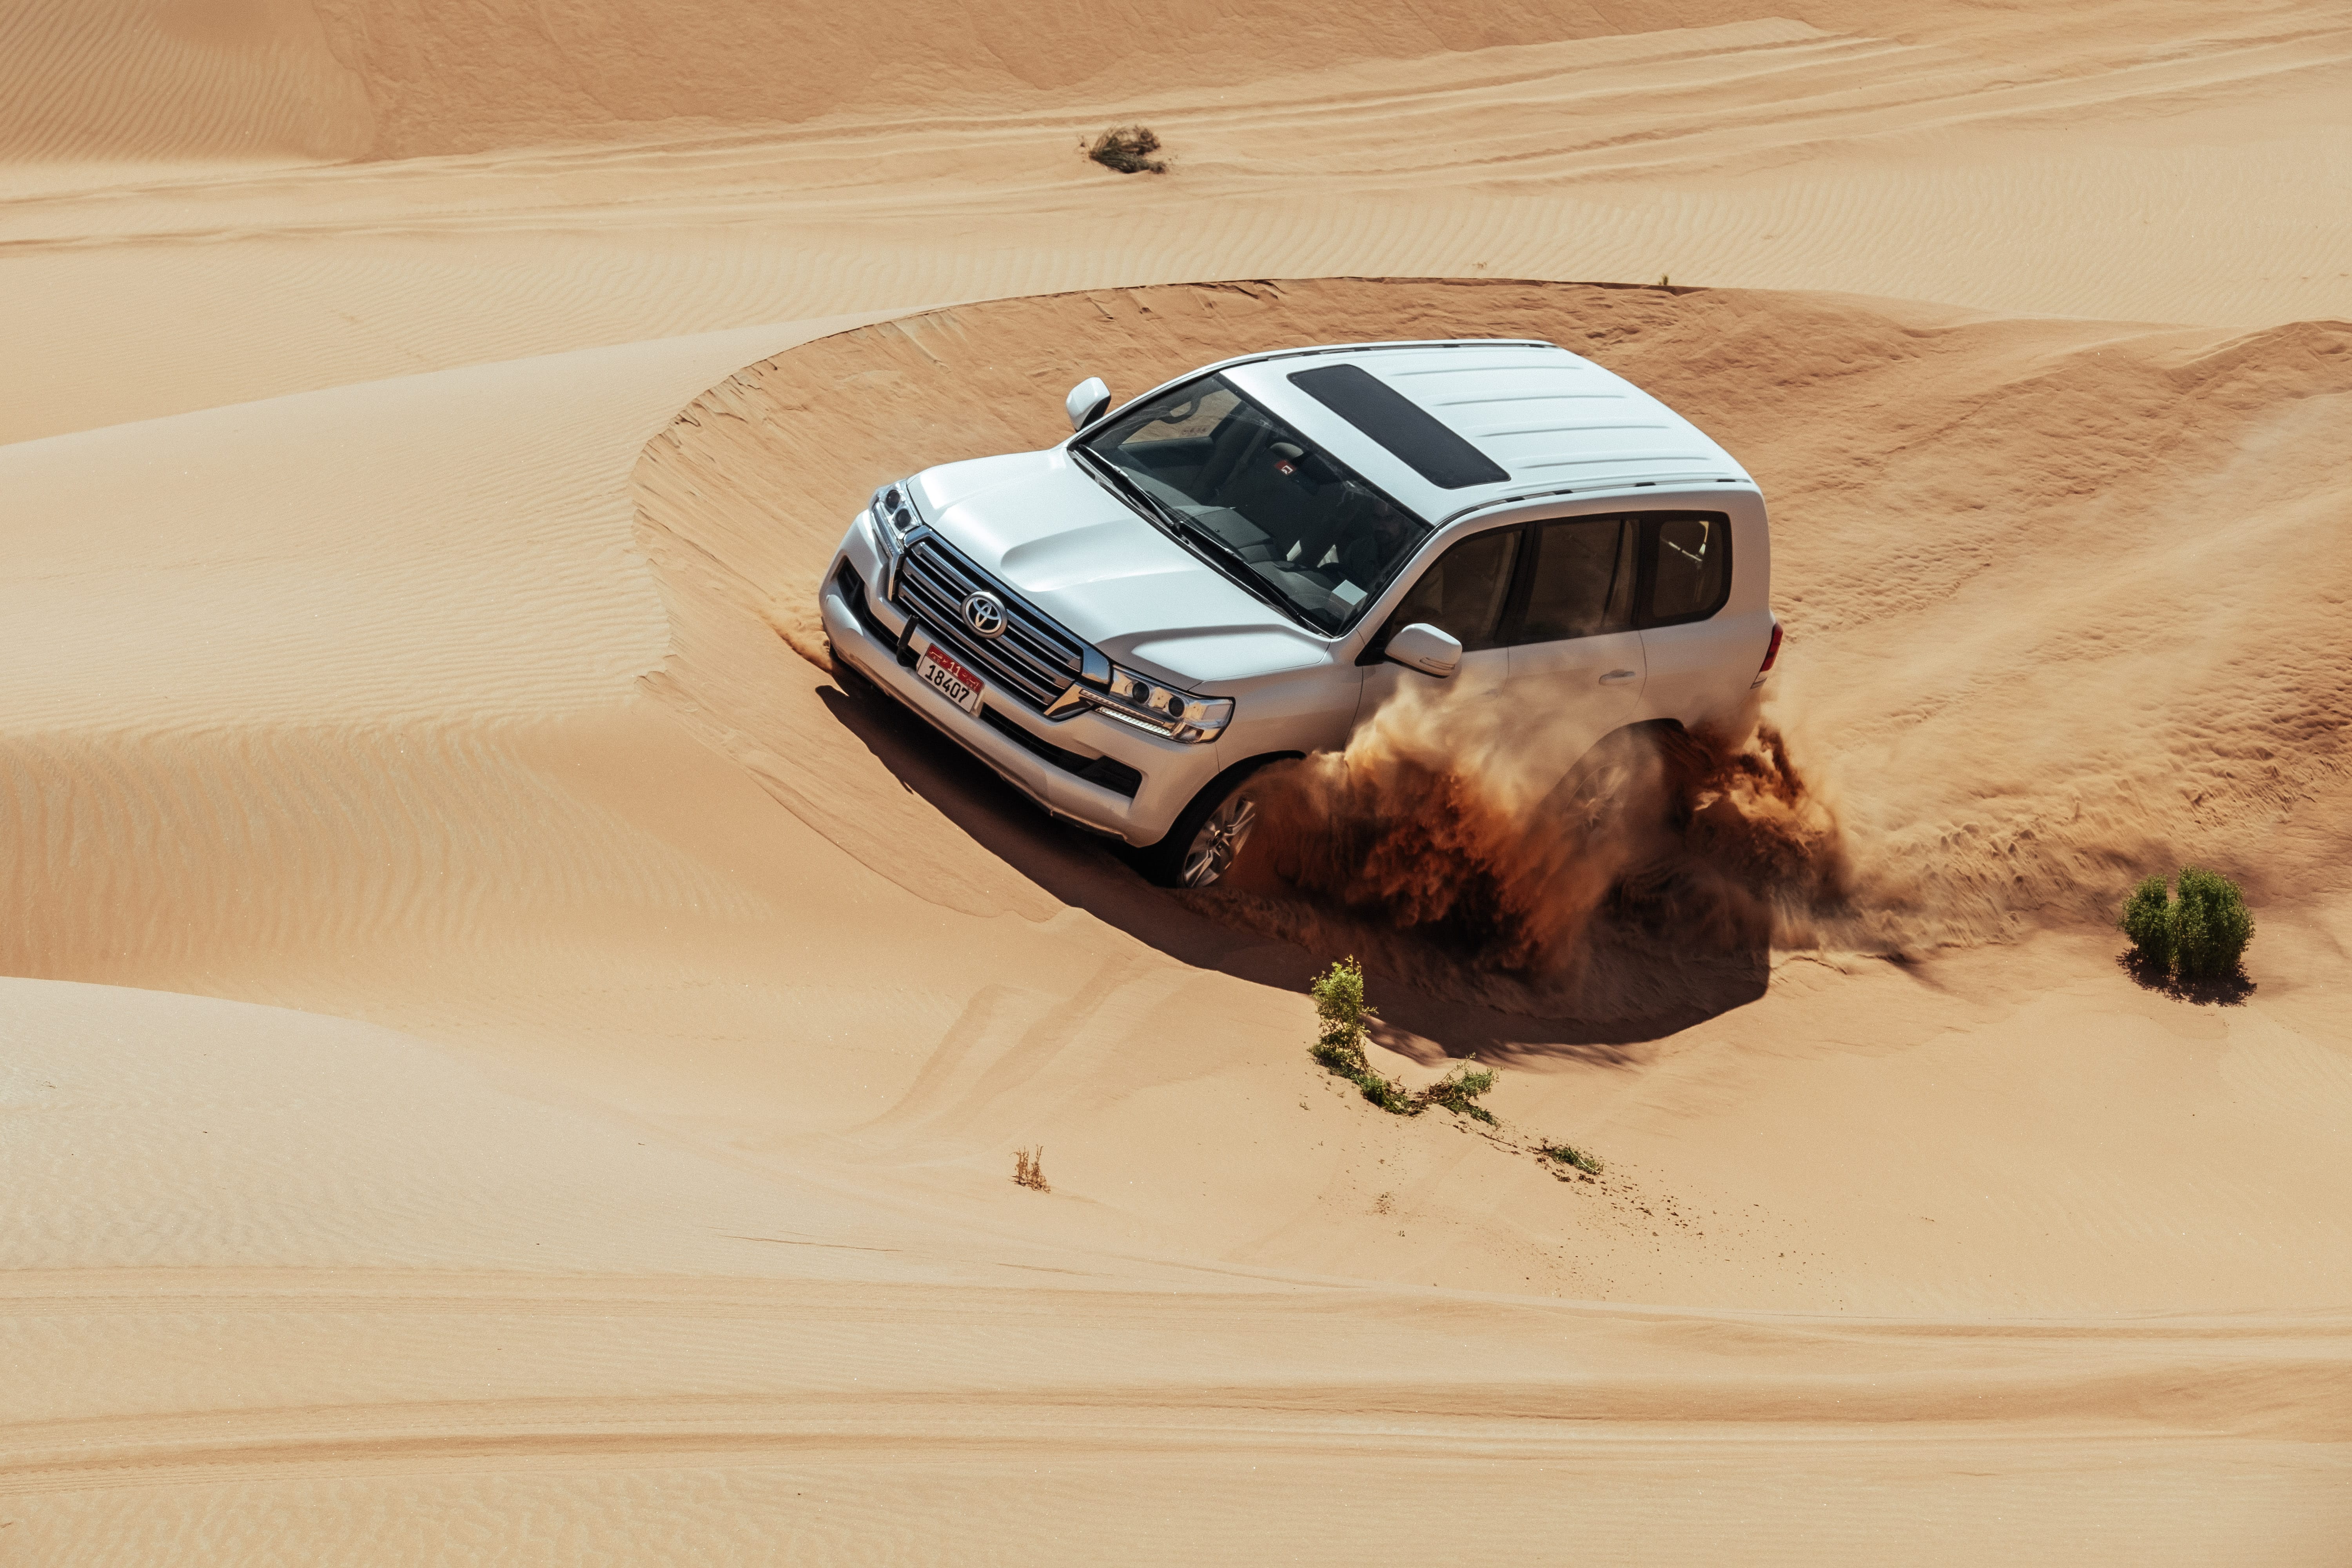 You are currently viewing Abenteuer in Abu Dhabi: Offroad durch die Wüste